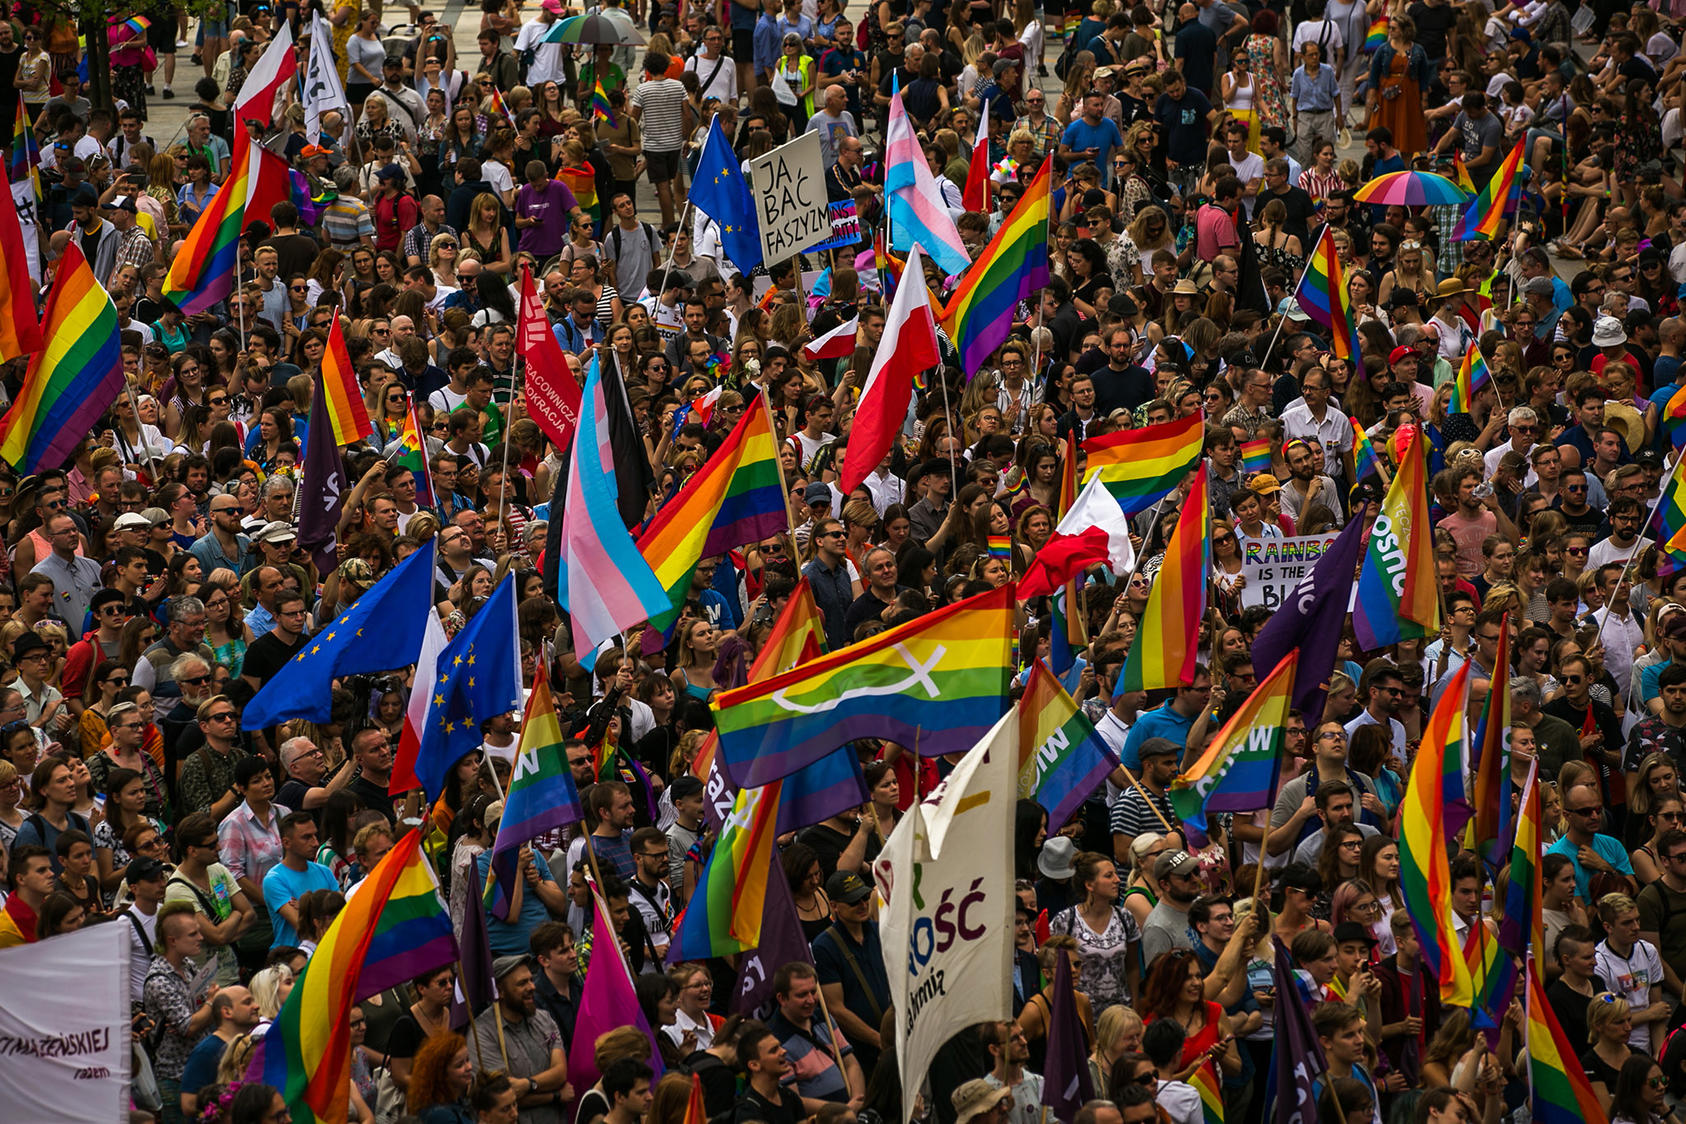 An LGBTQ rally in Warsaw, Poland, July 27, 2019. (Anna Liminowicz/The New York Times)